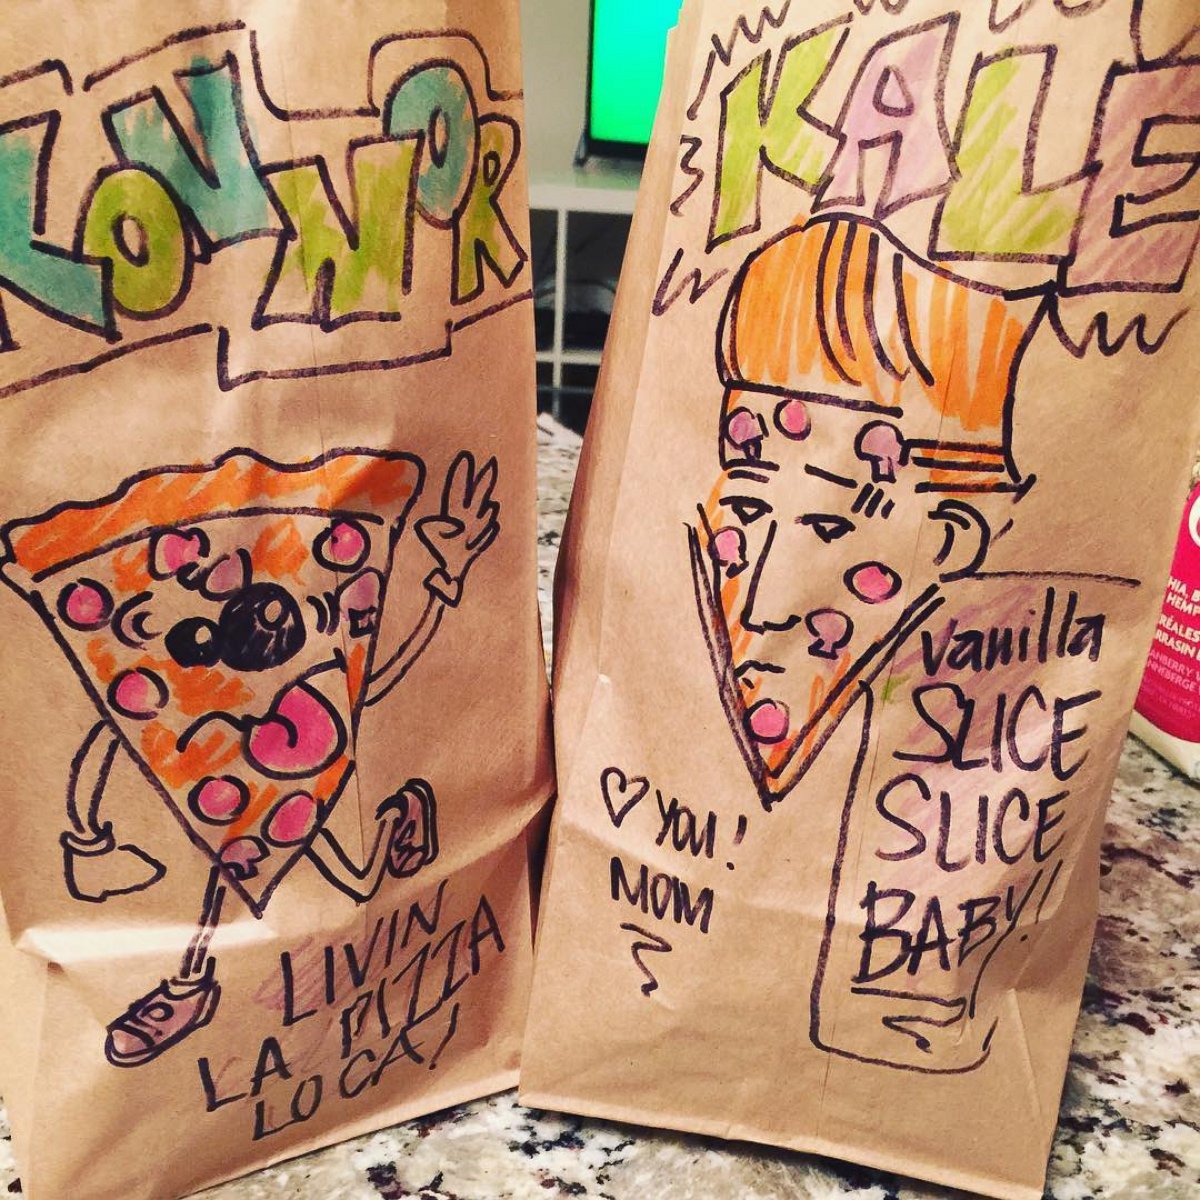 PHOTO: Artistic Mom Wins at the Lunch Bag Game